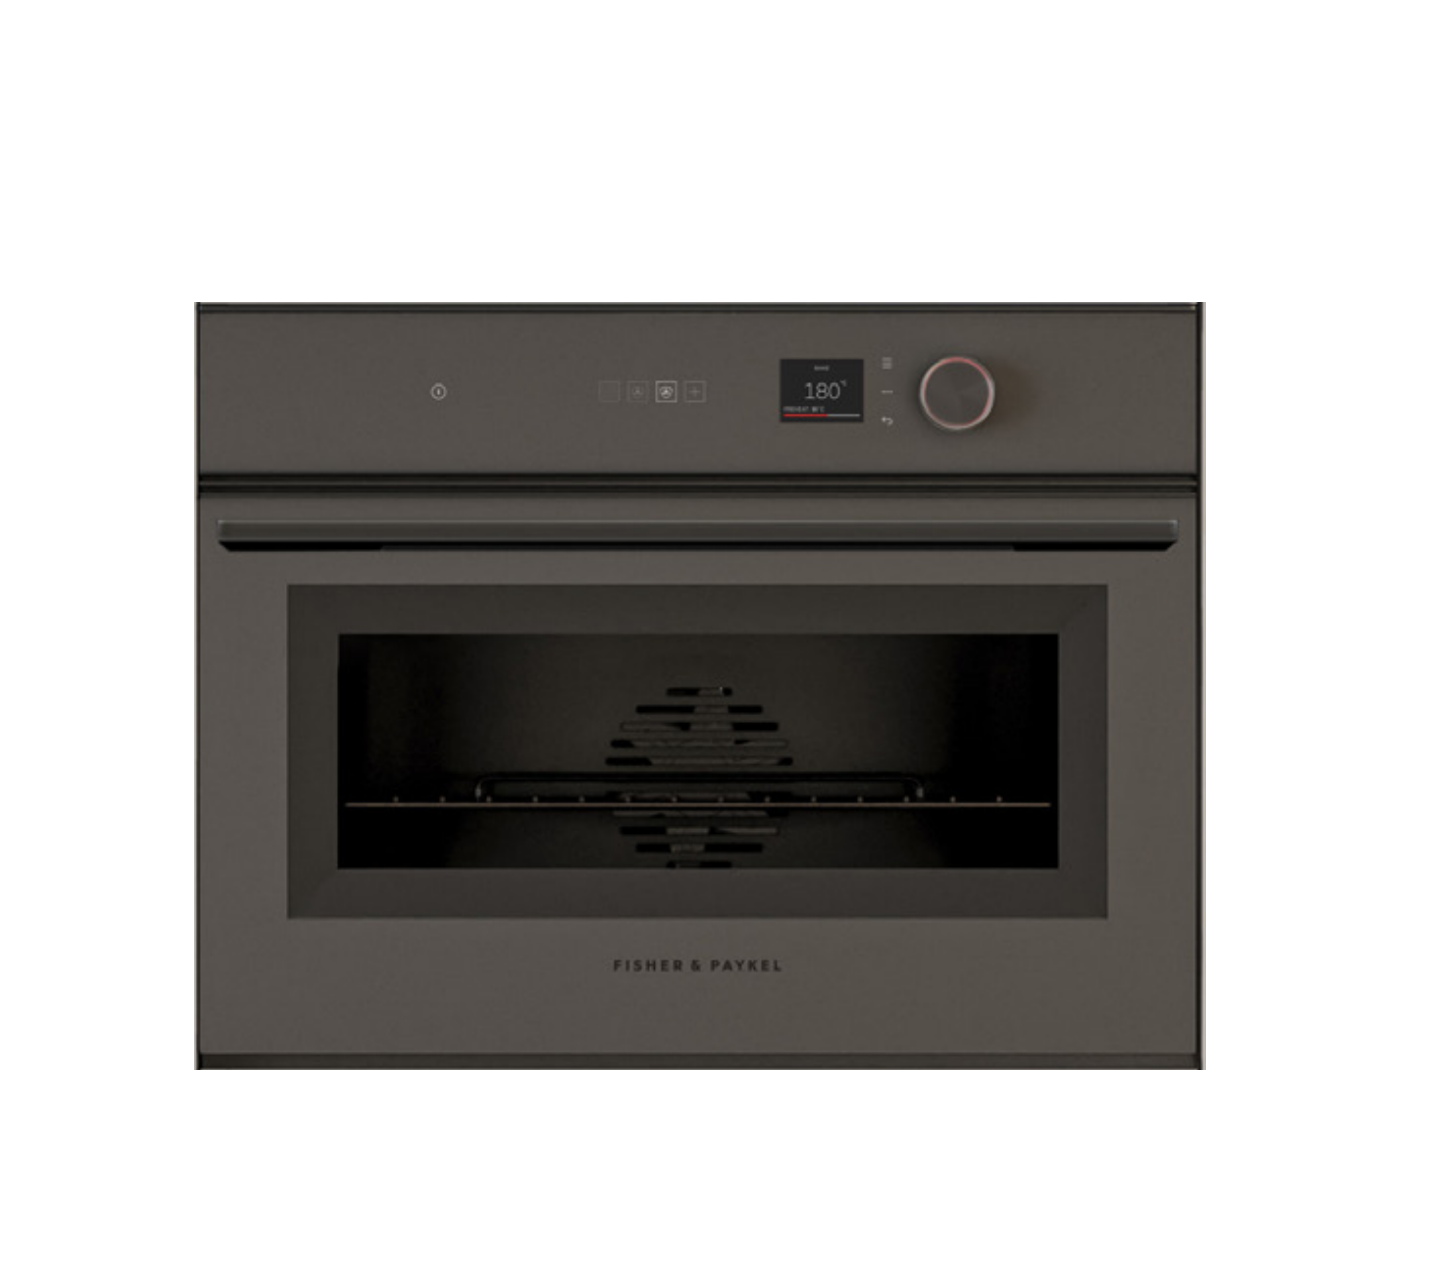 60cm Compact Steam Oven